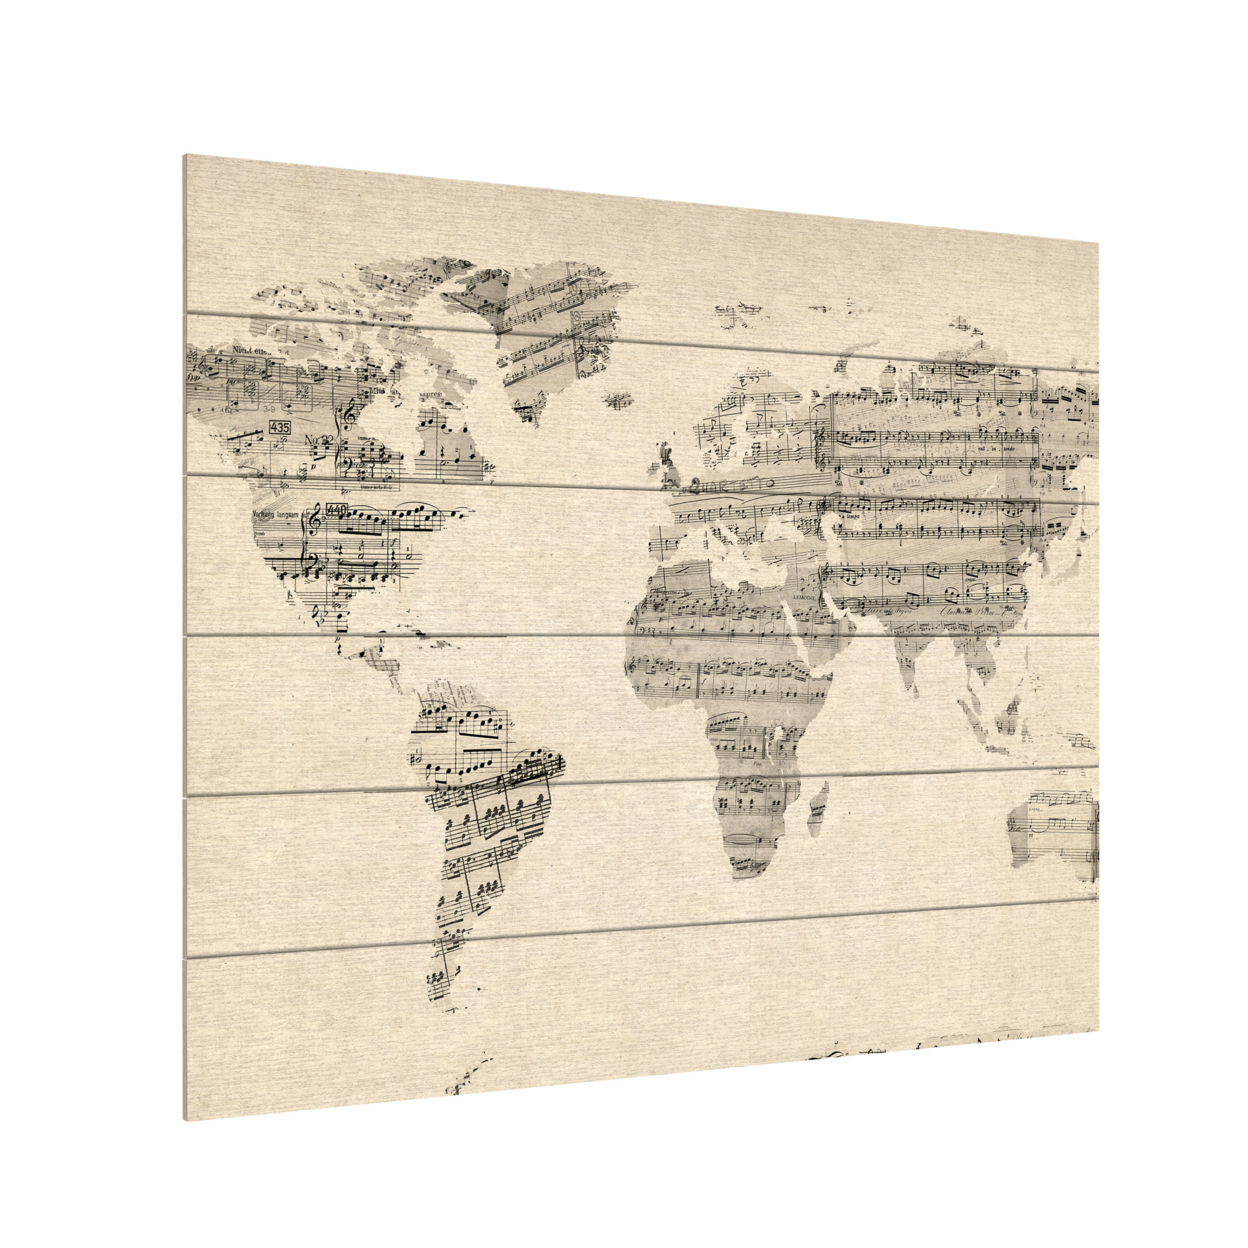 Wooden Slat Art 18 X 22 Inches Titled Old Sheet Music World Map Ready To Hang Home Decor Picture